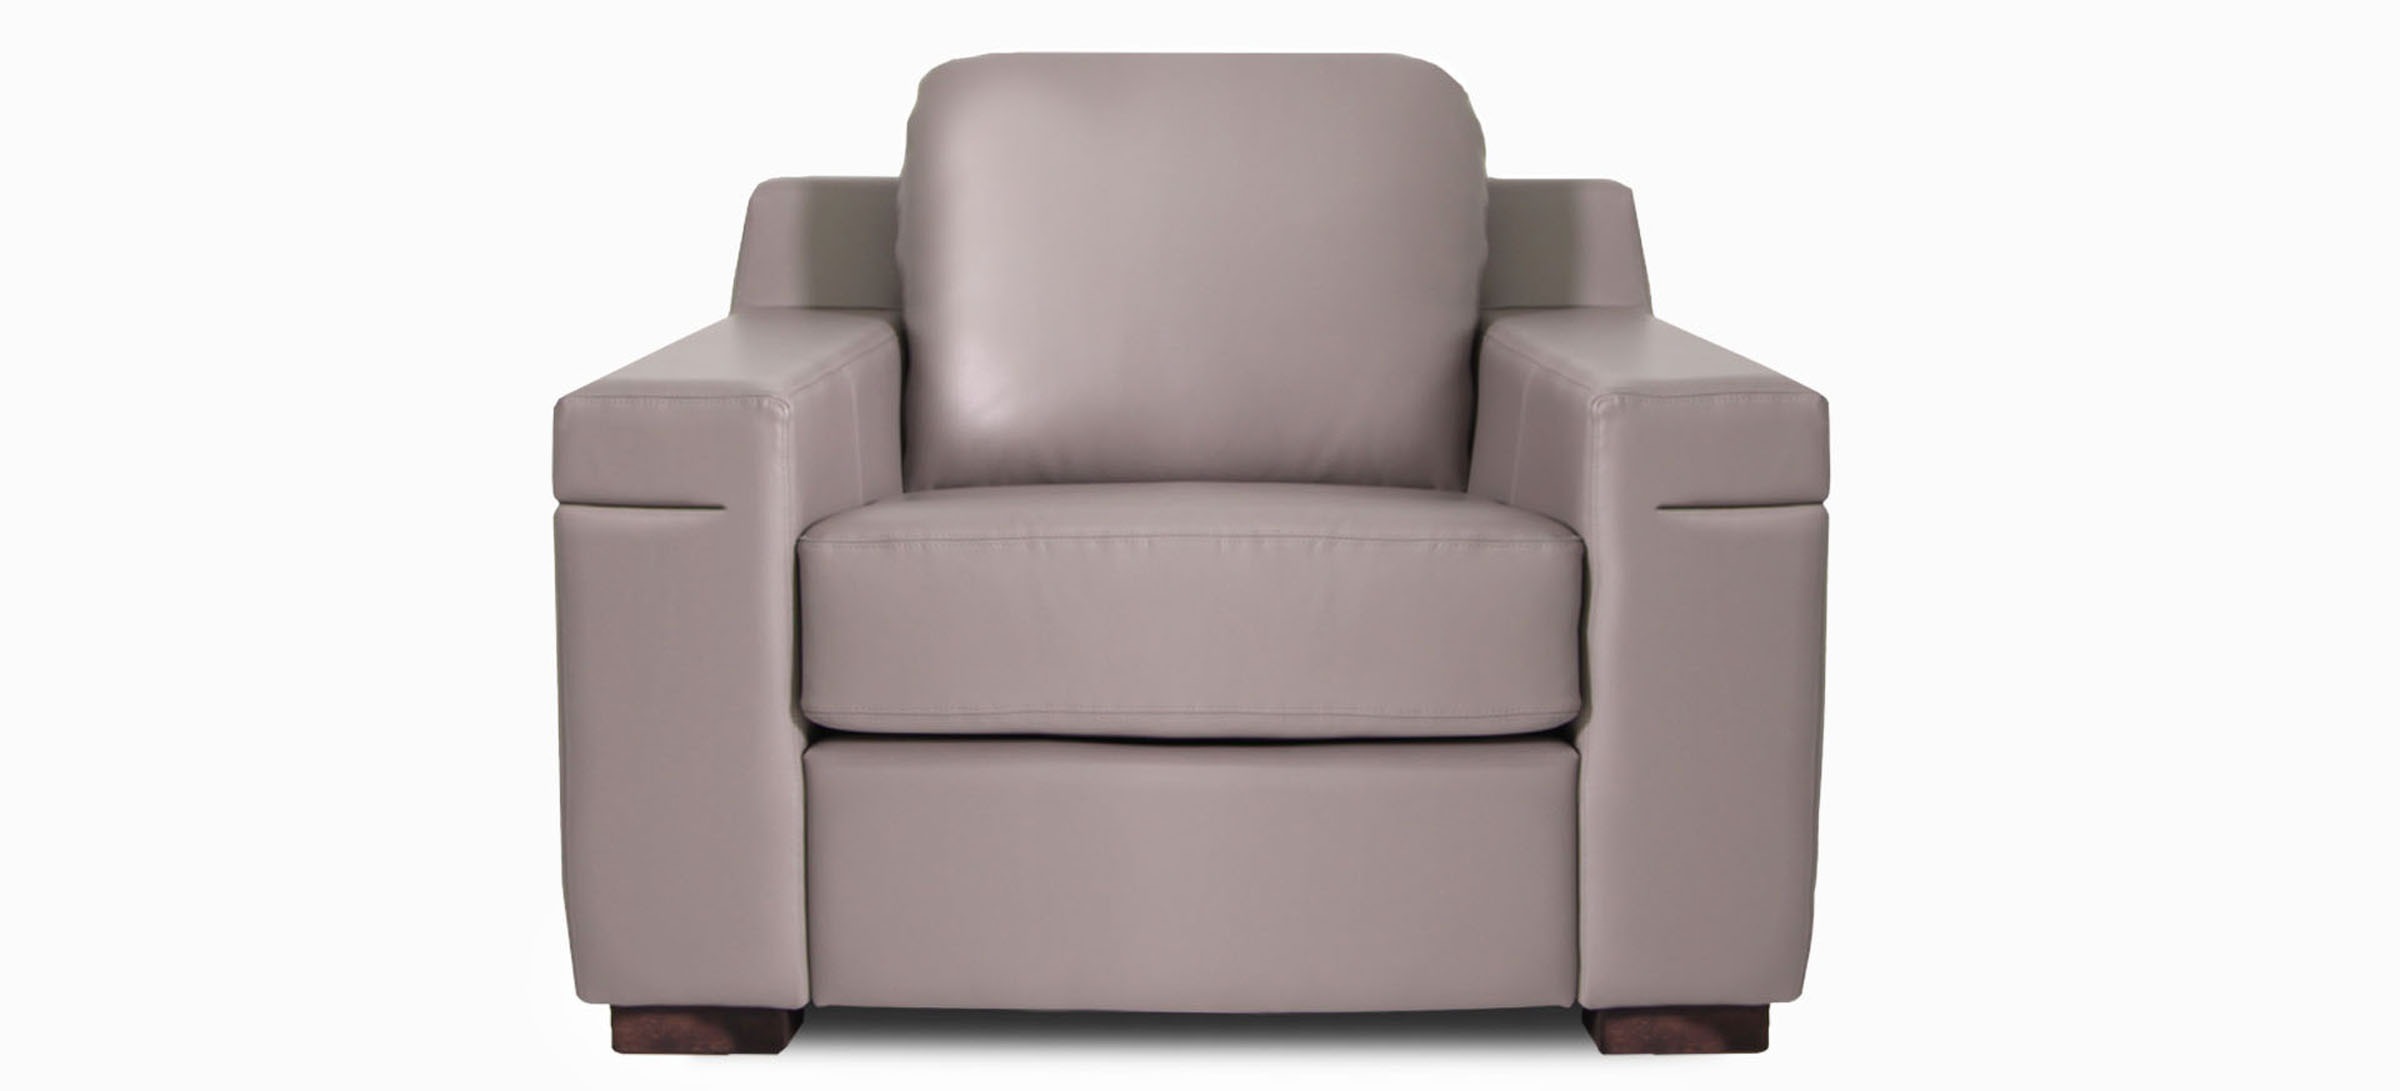 Odessa Fauteuil Front